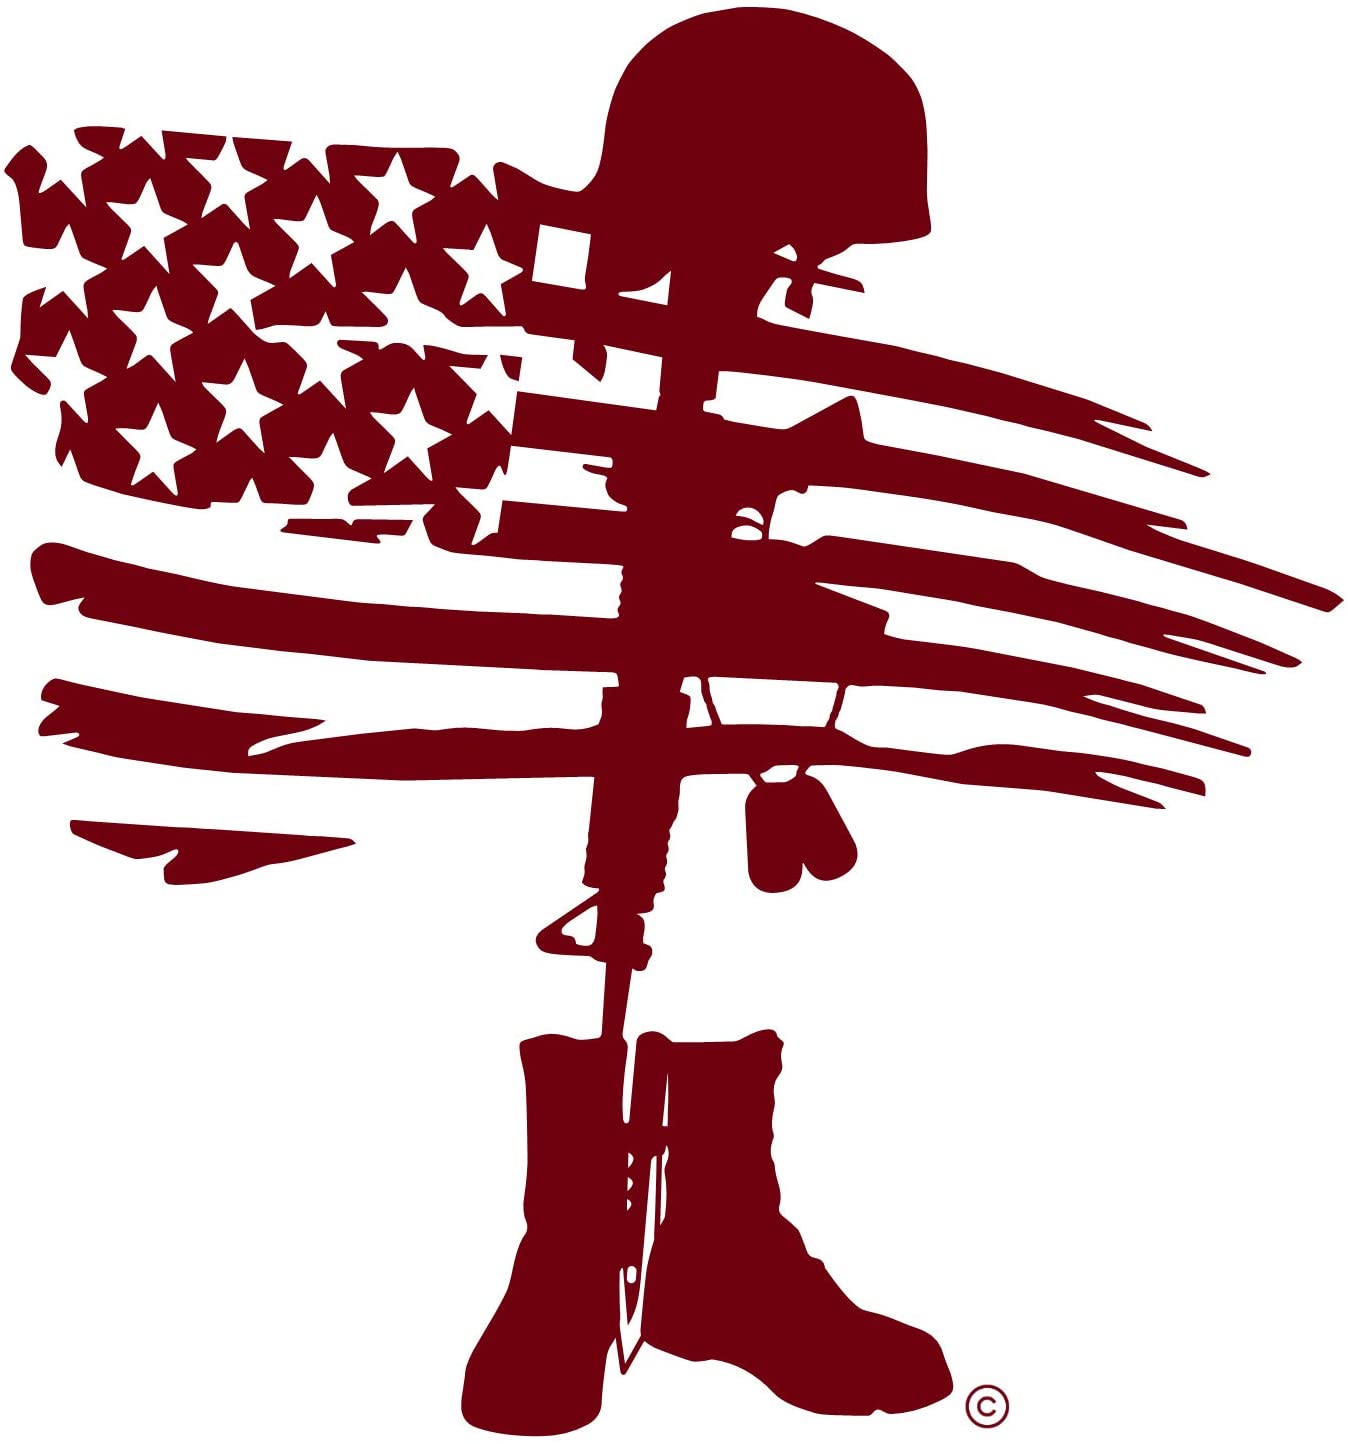 US Military Veteran Wall Decor US Flag Battlefield Cross Decal Unique Soldier Memorial Wall Decal An Inspiring Patriotic Vinyl Decal Superior US Veteran Gifts USA Made Burgundy.: Home & Kitchen